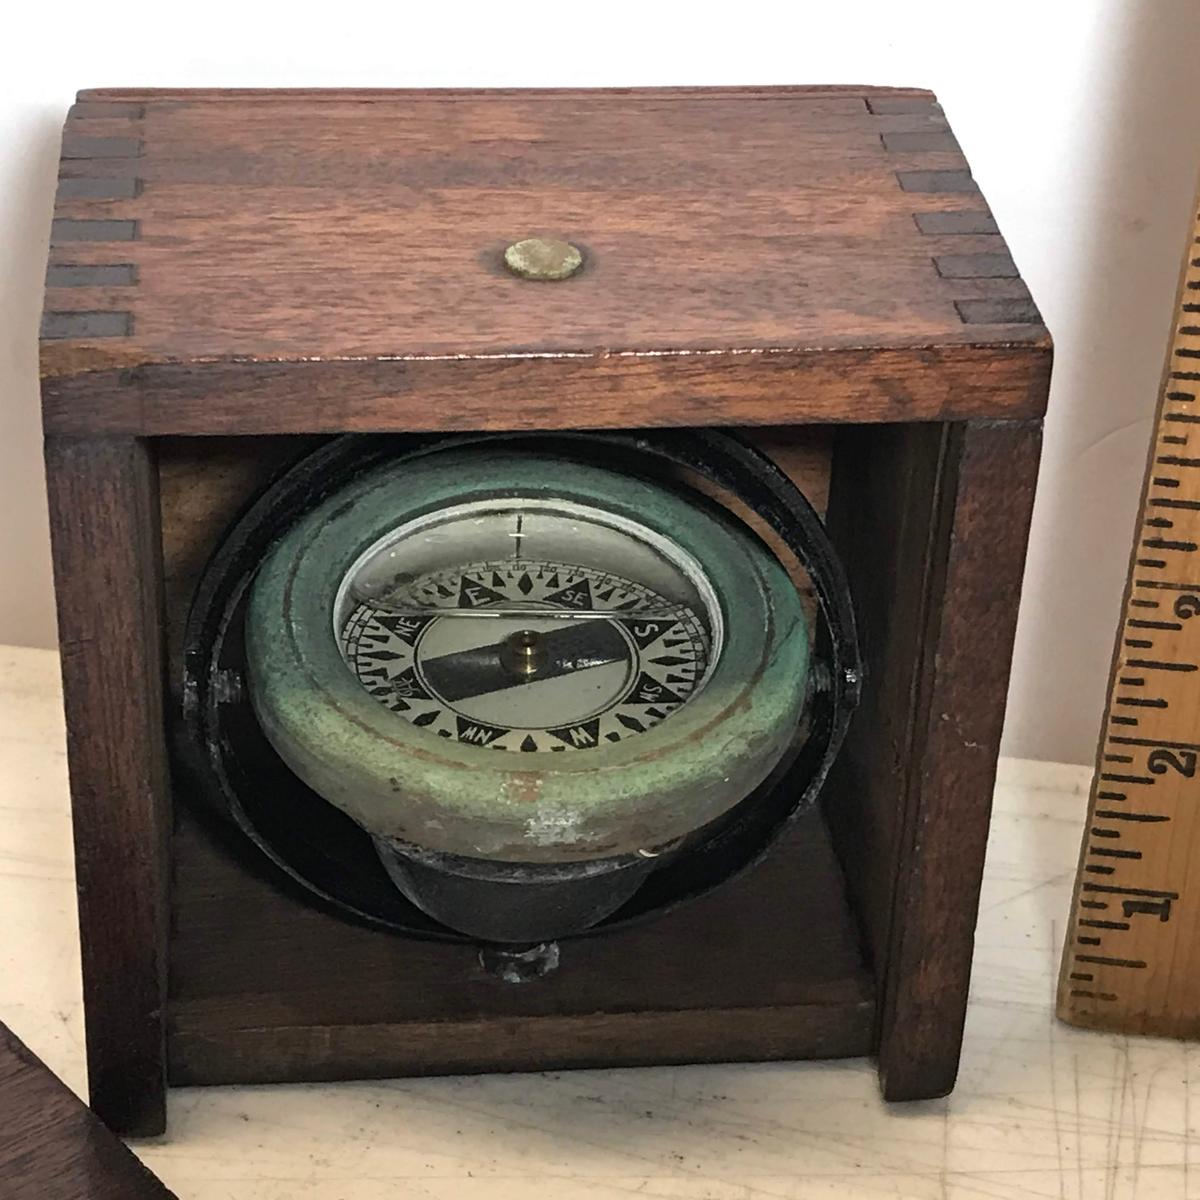 Vintage Nautical Compass in Wooden Dove-Tailed Box